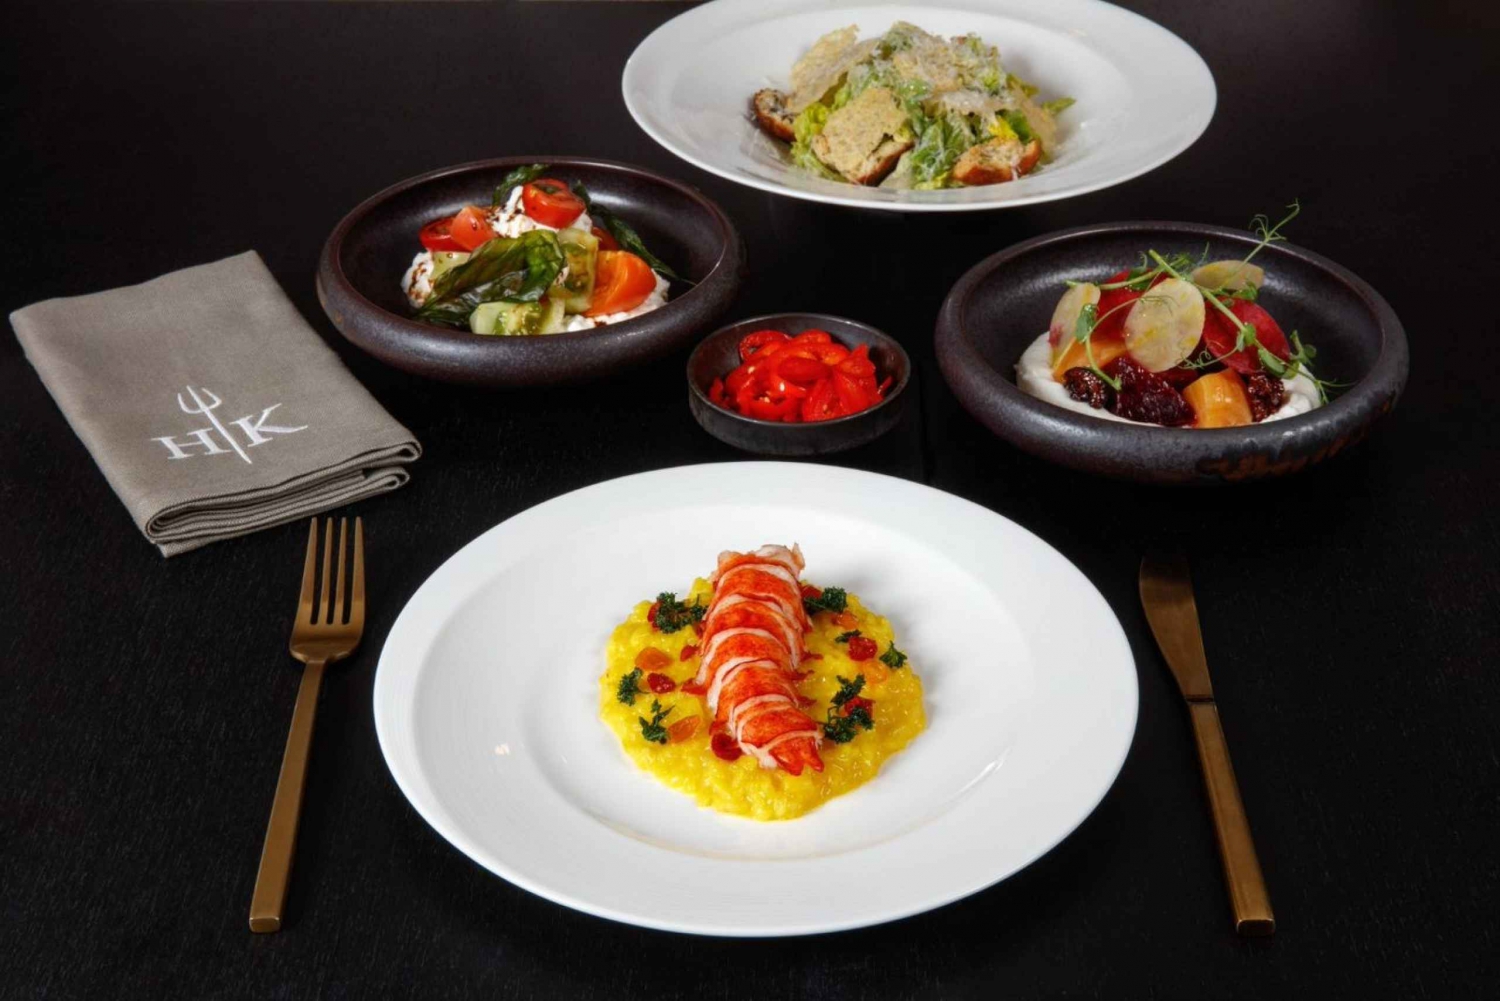 Dubai: 3-Course Set Menu at Hell’s Kitchen at Bluewaters